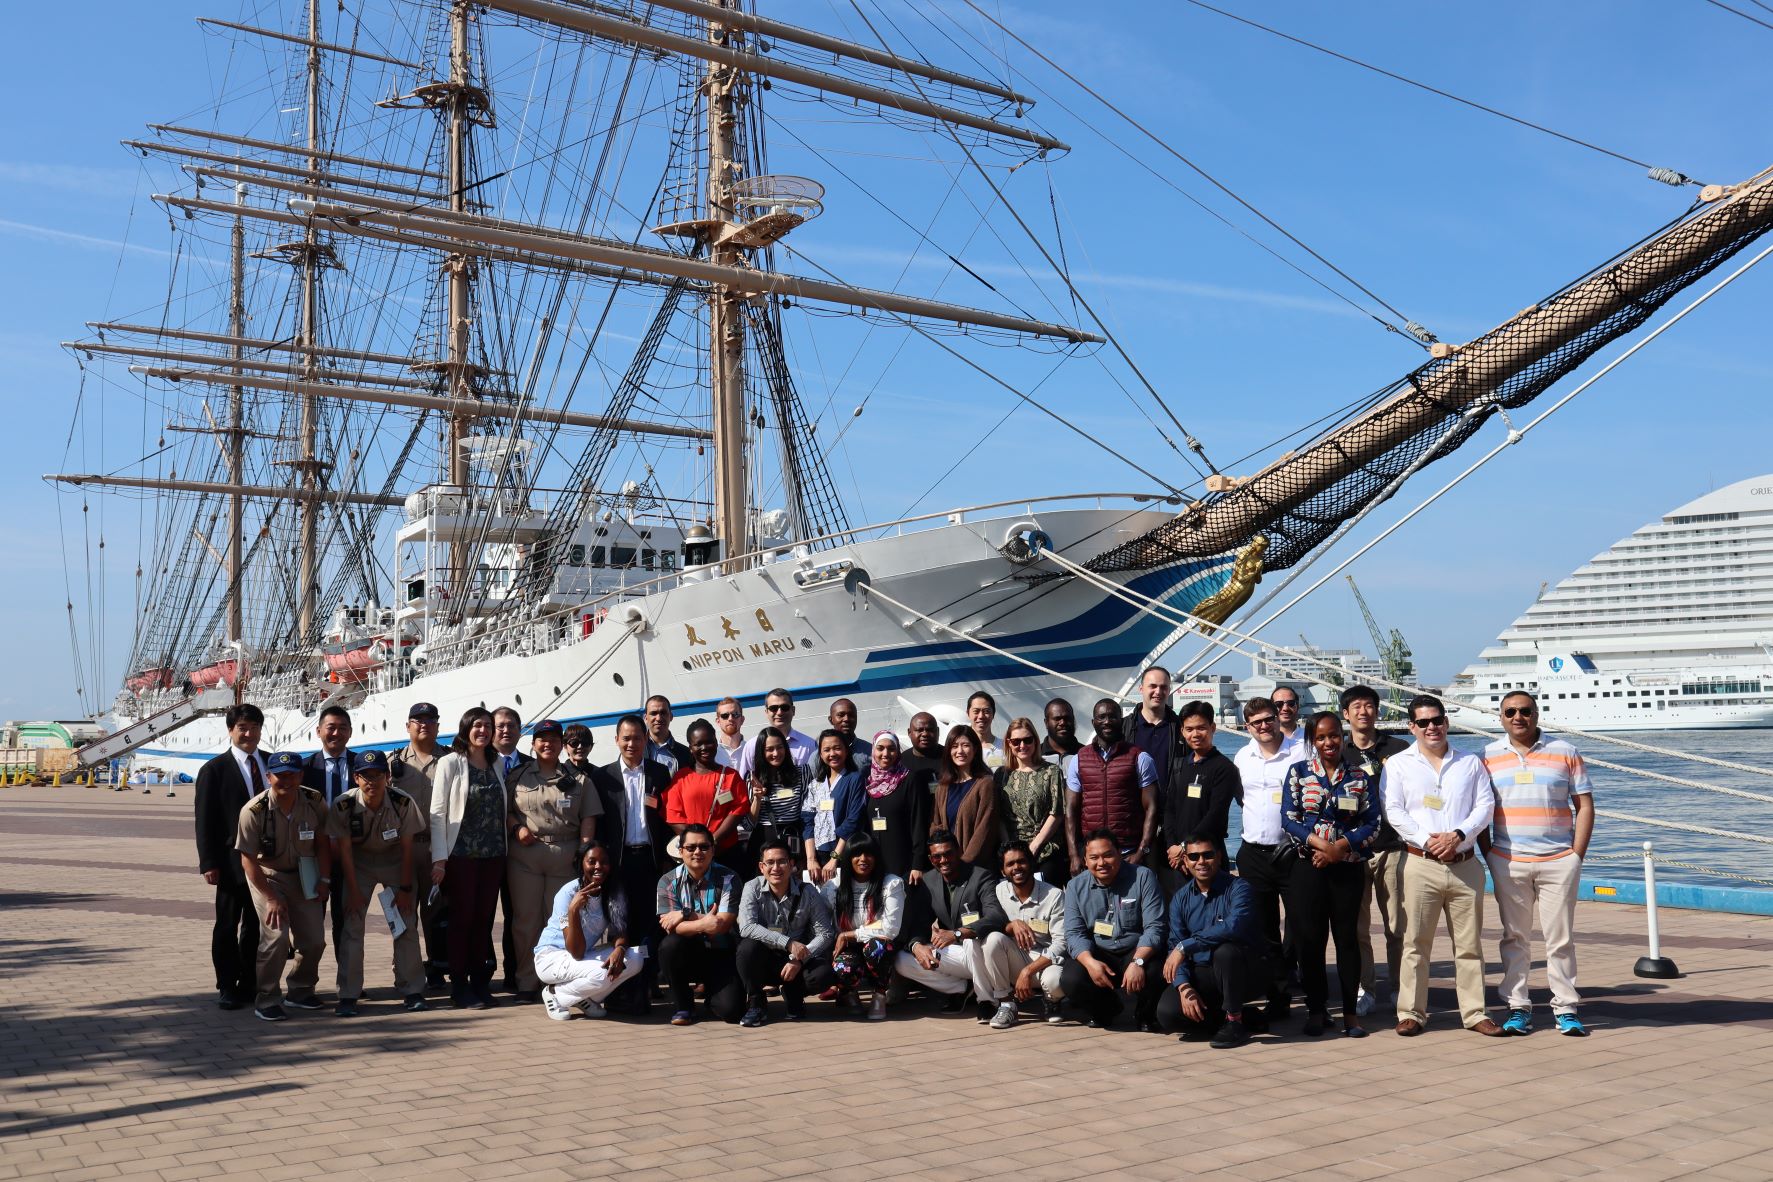 WMU Sasakawa Scholarship students pose for a commemorative photo in front of the Nippon Maru training ship at Kobe Port during the 2019 training in Japan